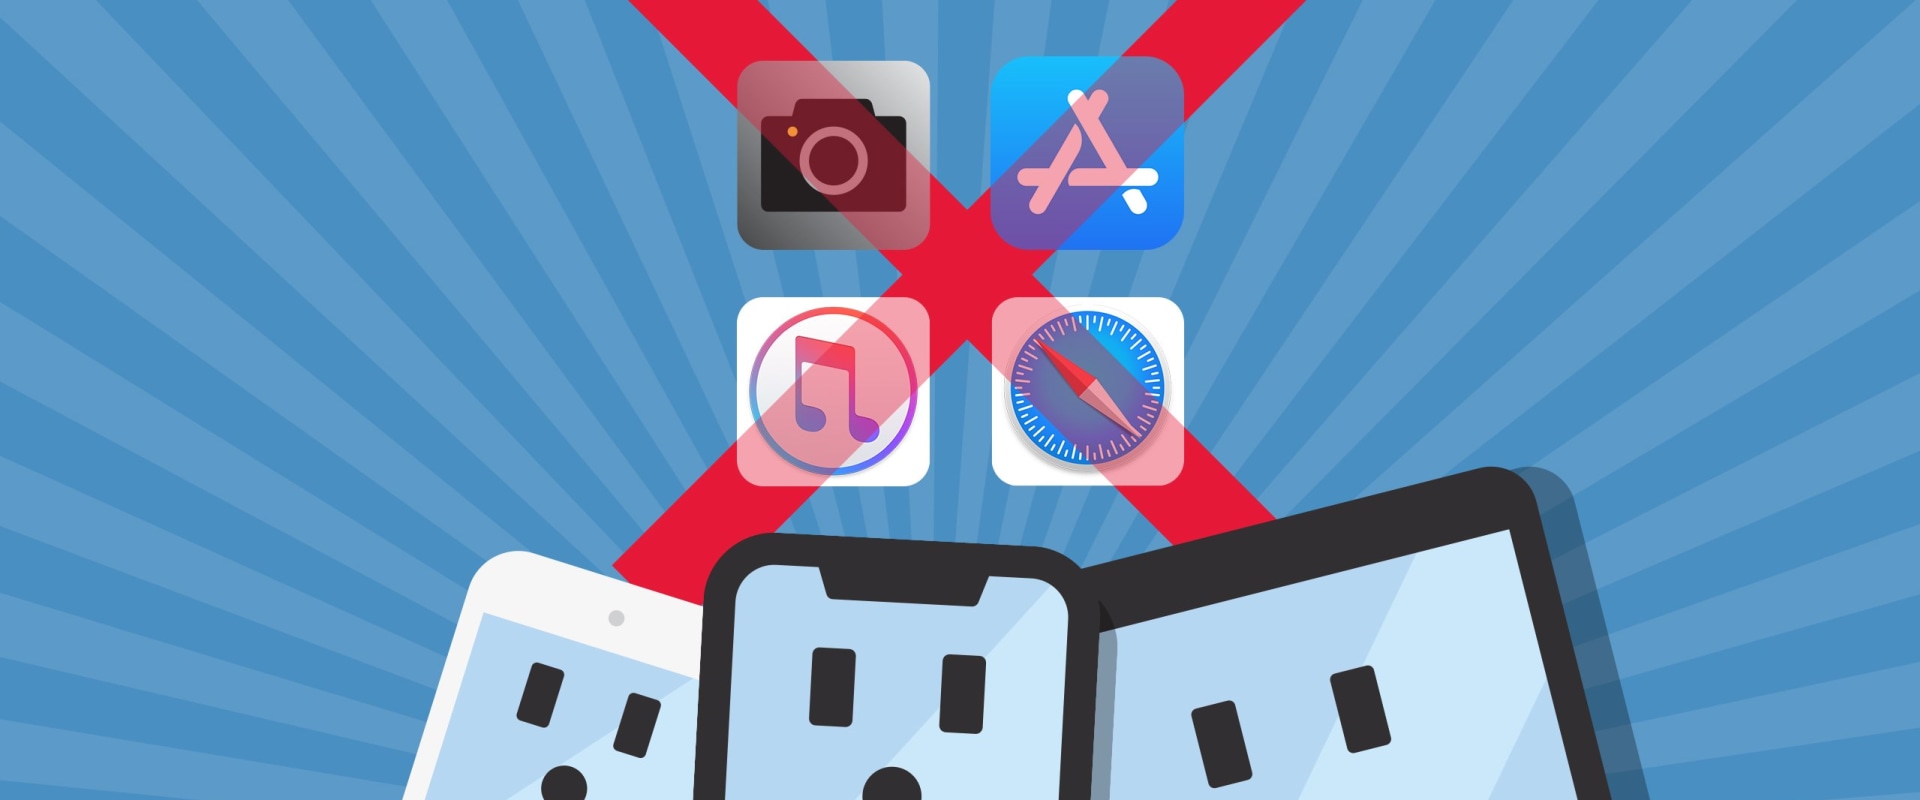 How to Restore the App Store on Your Device